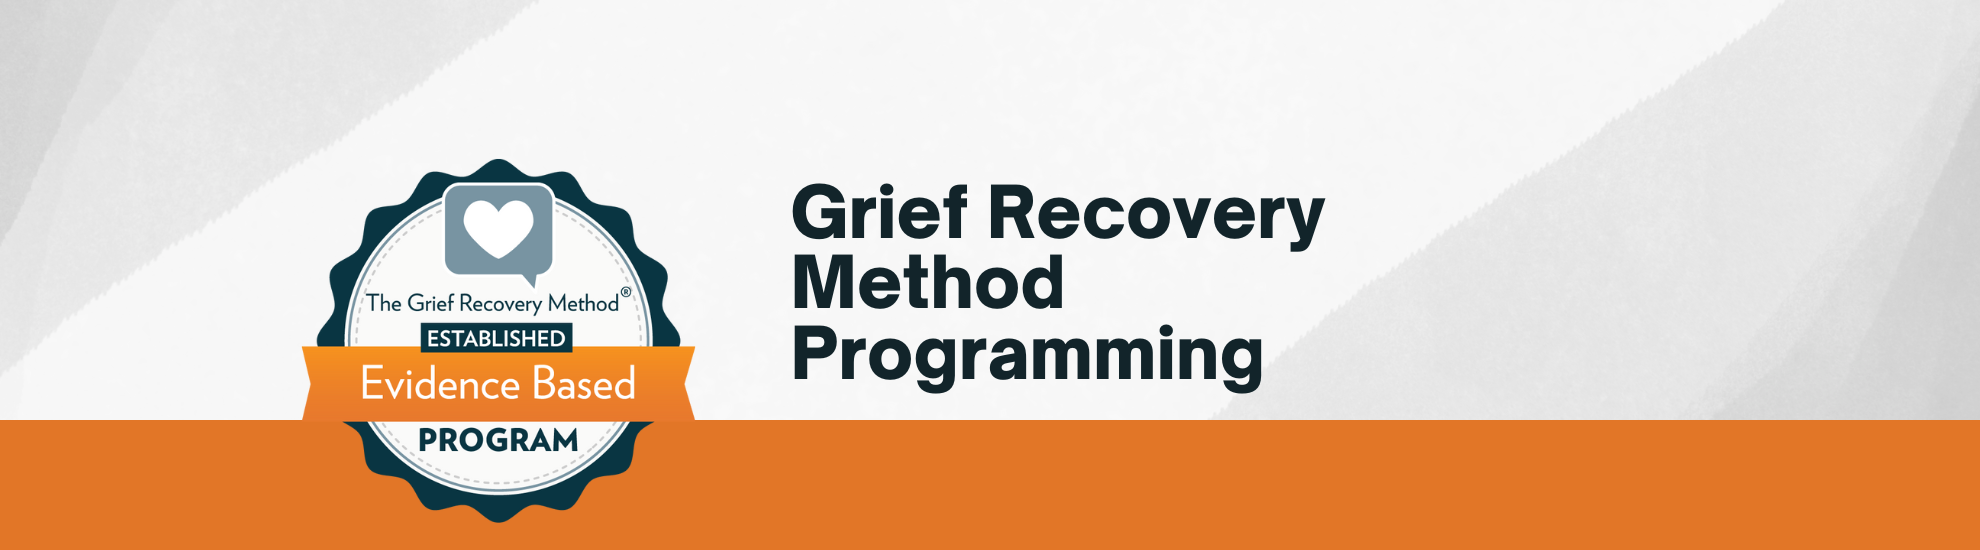 Grief Recovery Method Programming Banner